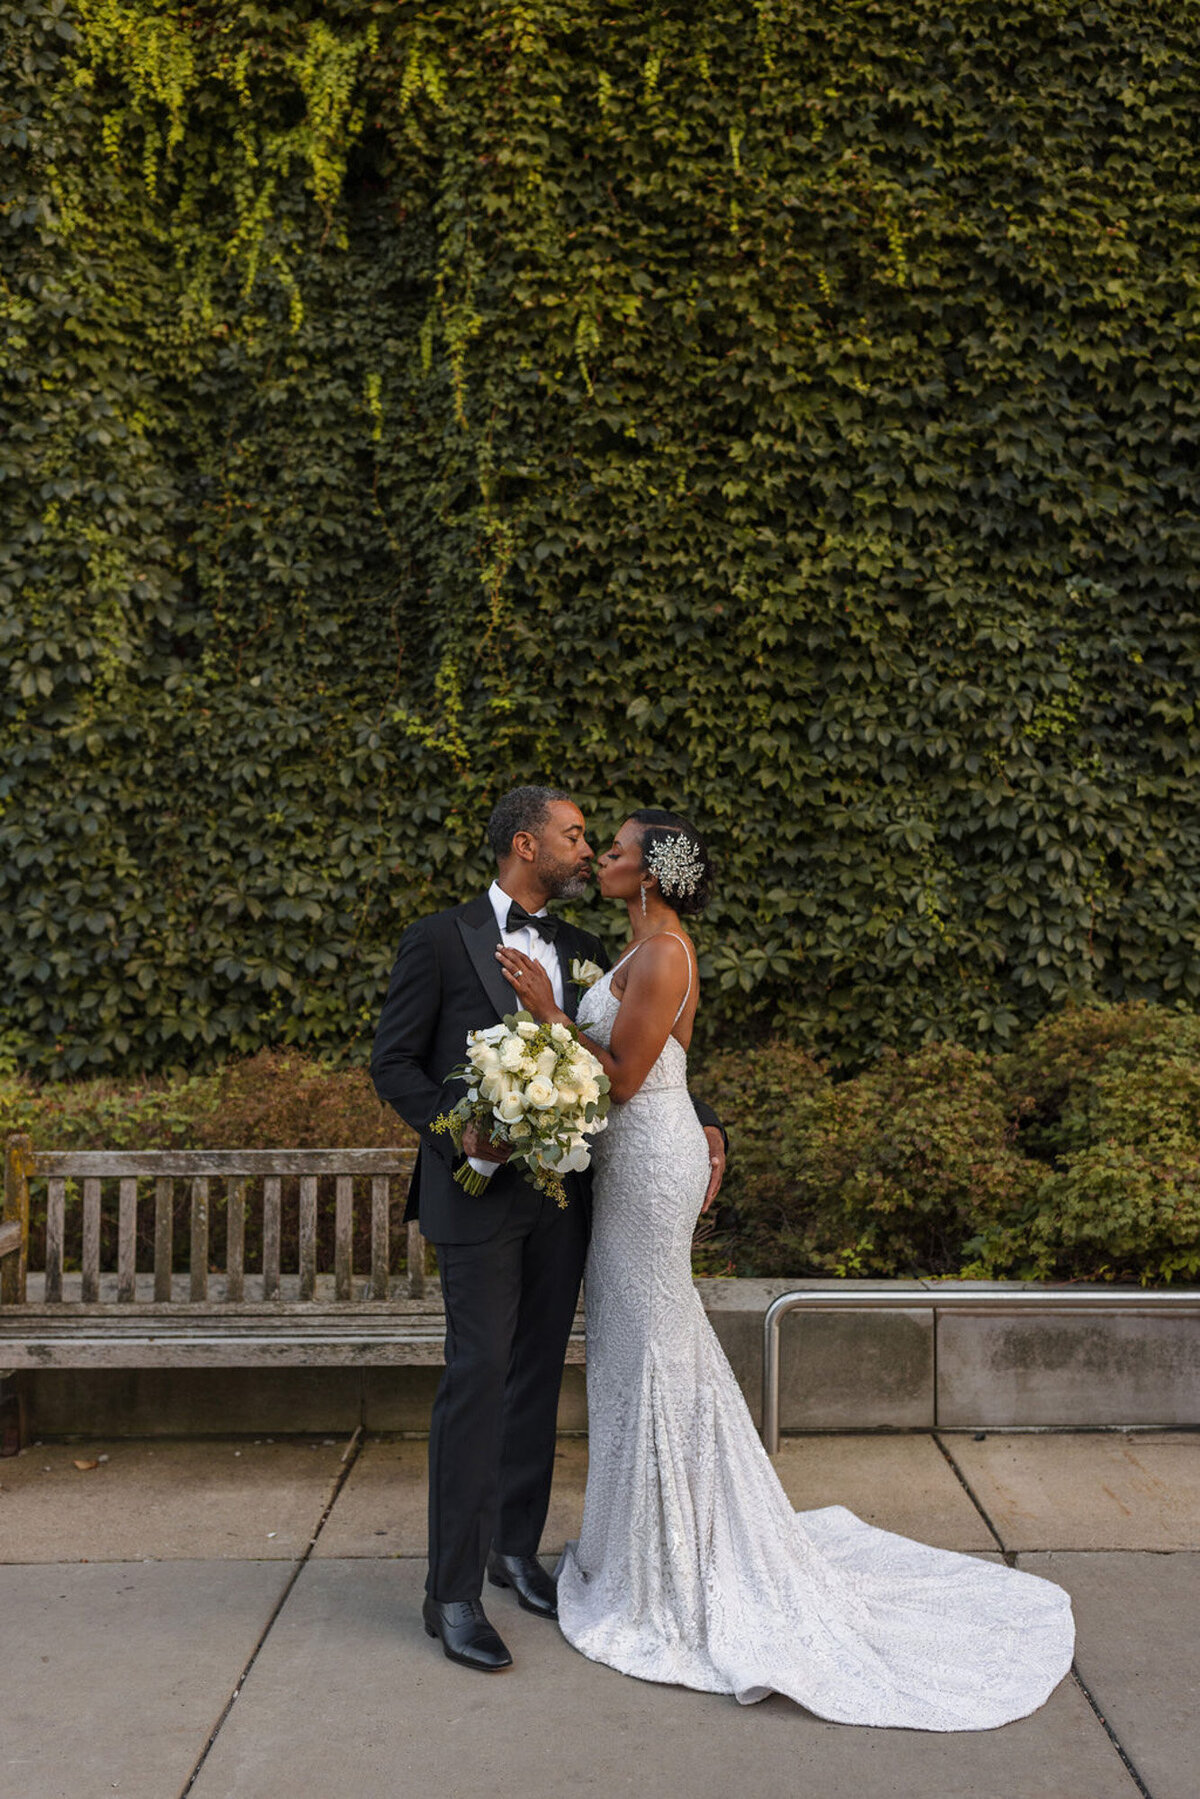 Tanya and Dustin bride and groom at luxury downtown chicago wedding